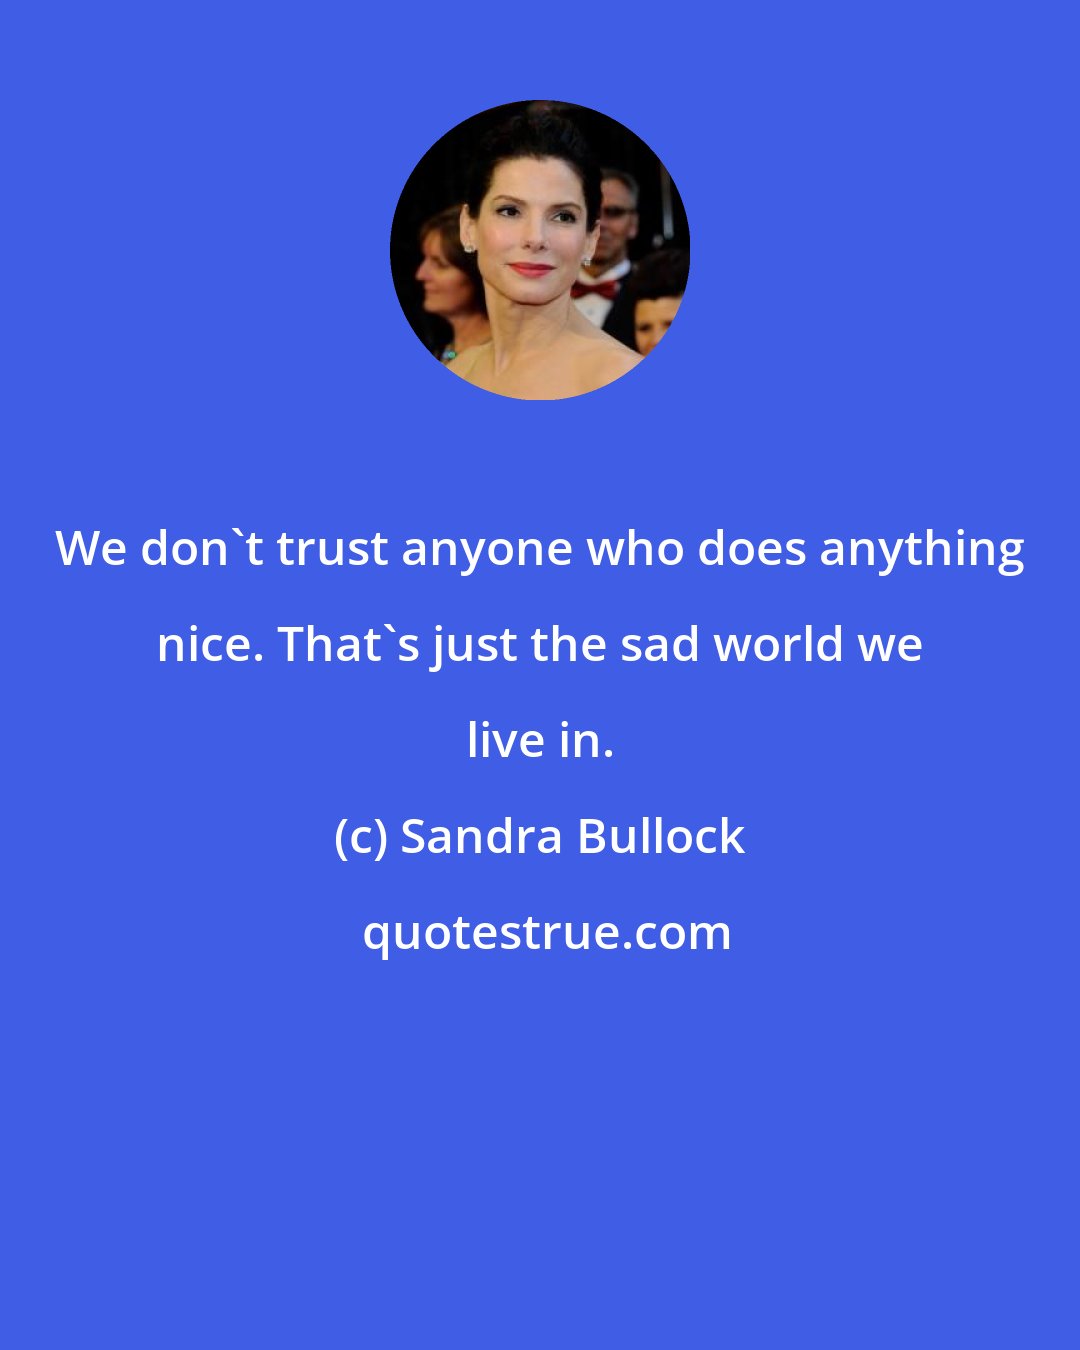 Sandra Bullock: We don't trust anyone who does anything nice. That's just the sad world we live in.